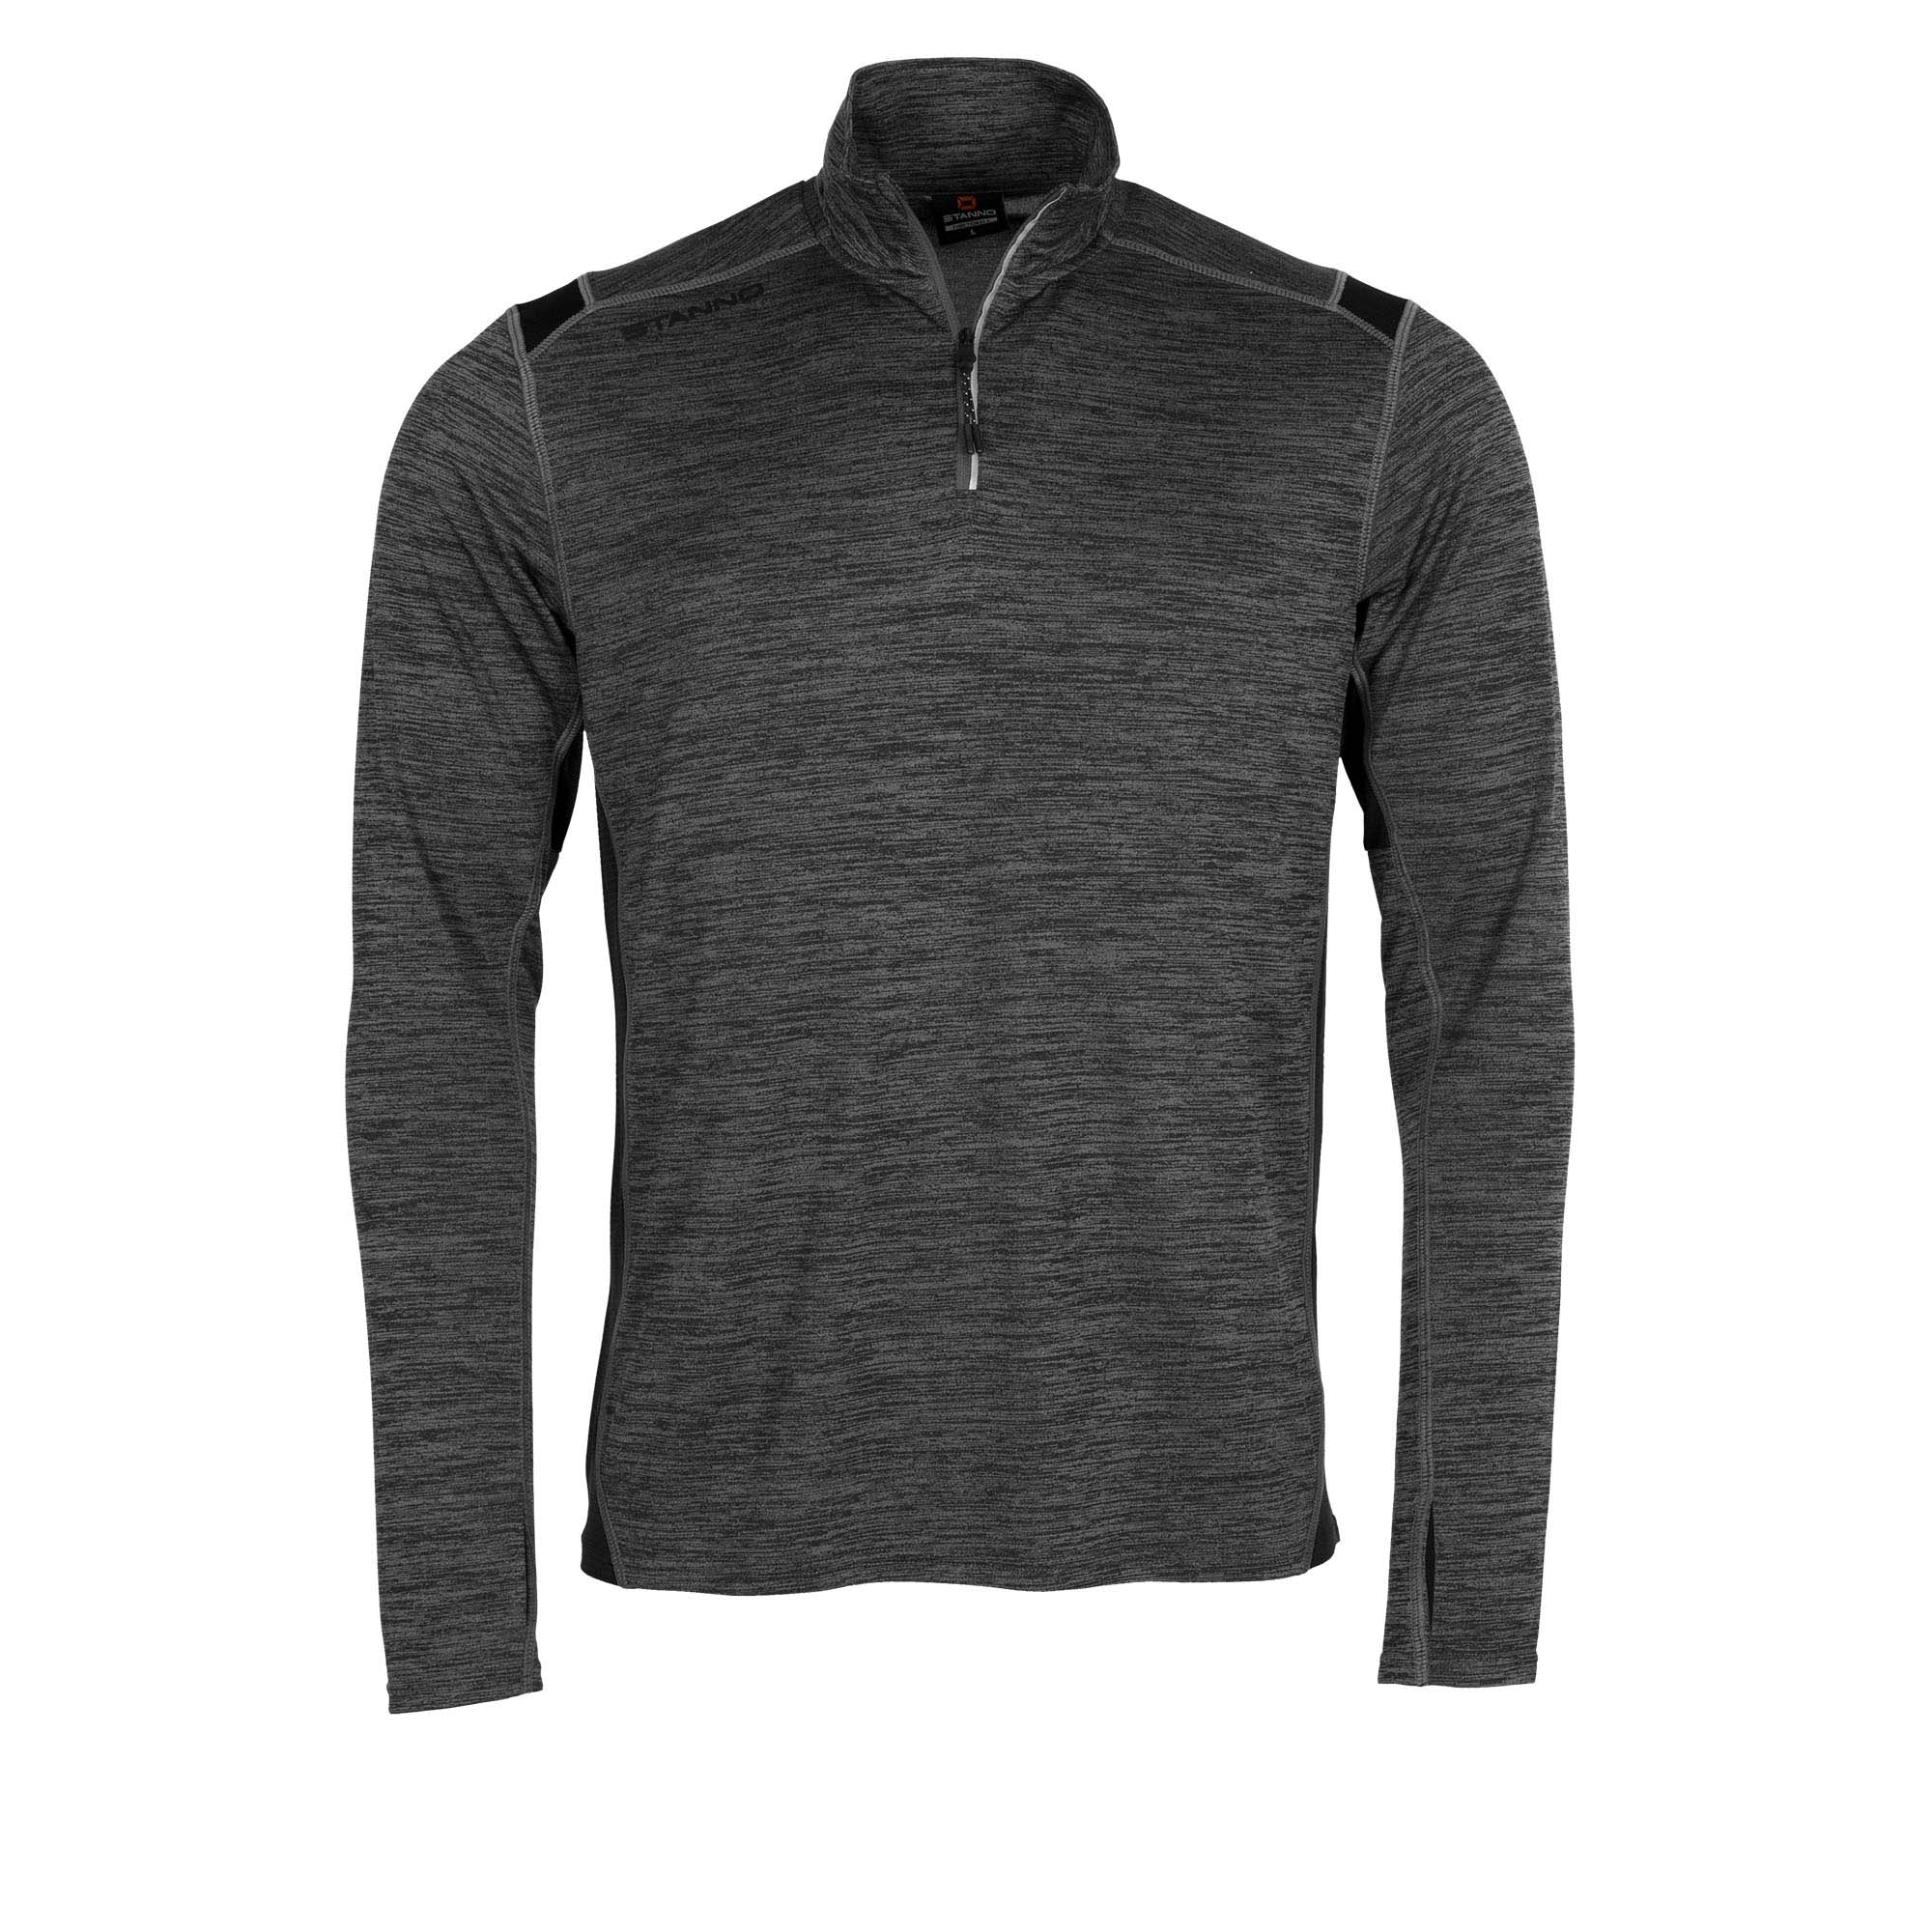 stanno top adv work out funct 1/4zip